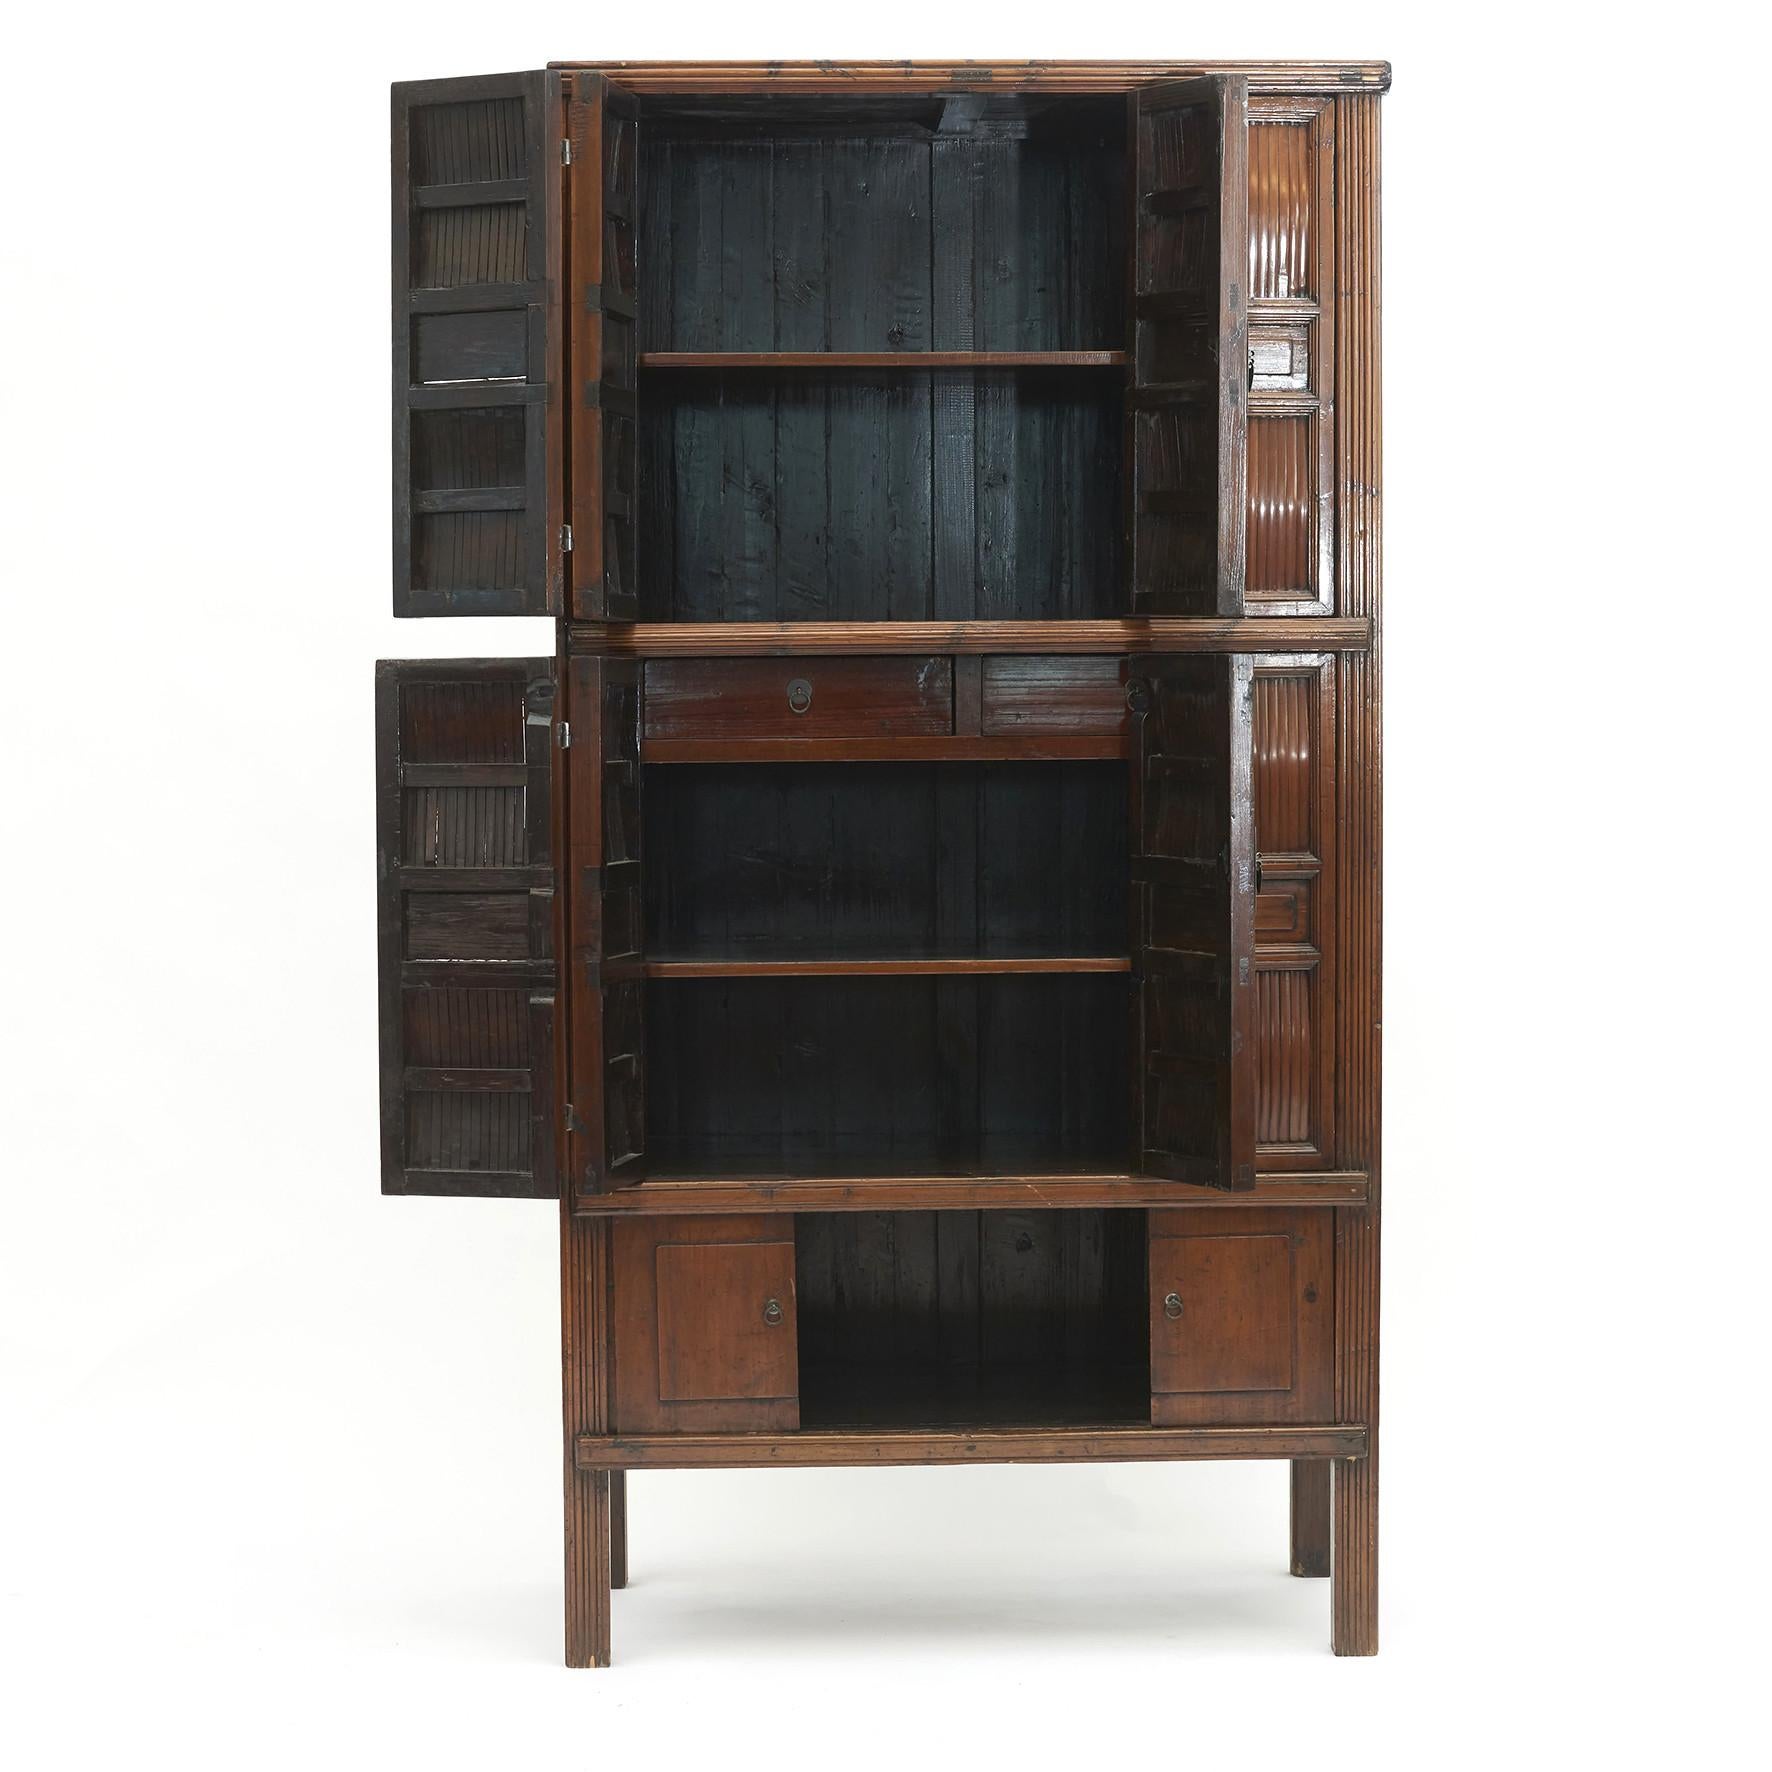 Chinese Qing dynasty Kitchen cabinet.
A Chinese Qing dynasty period kitchen cabinet from Zhejiang Province, 1840-1860.
Cypress wood with bamboo fillings in the doors.

This Chinese cabinet features two bi-fold doors that opens to reveal two